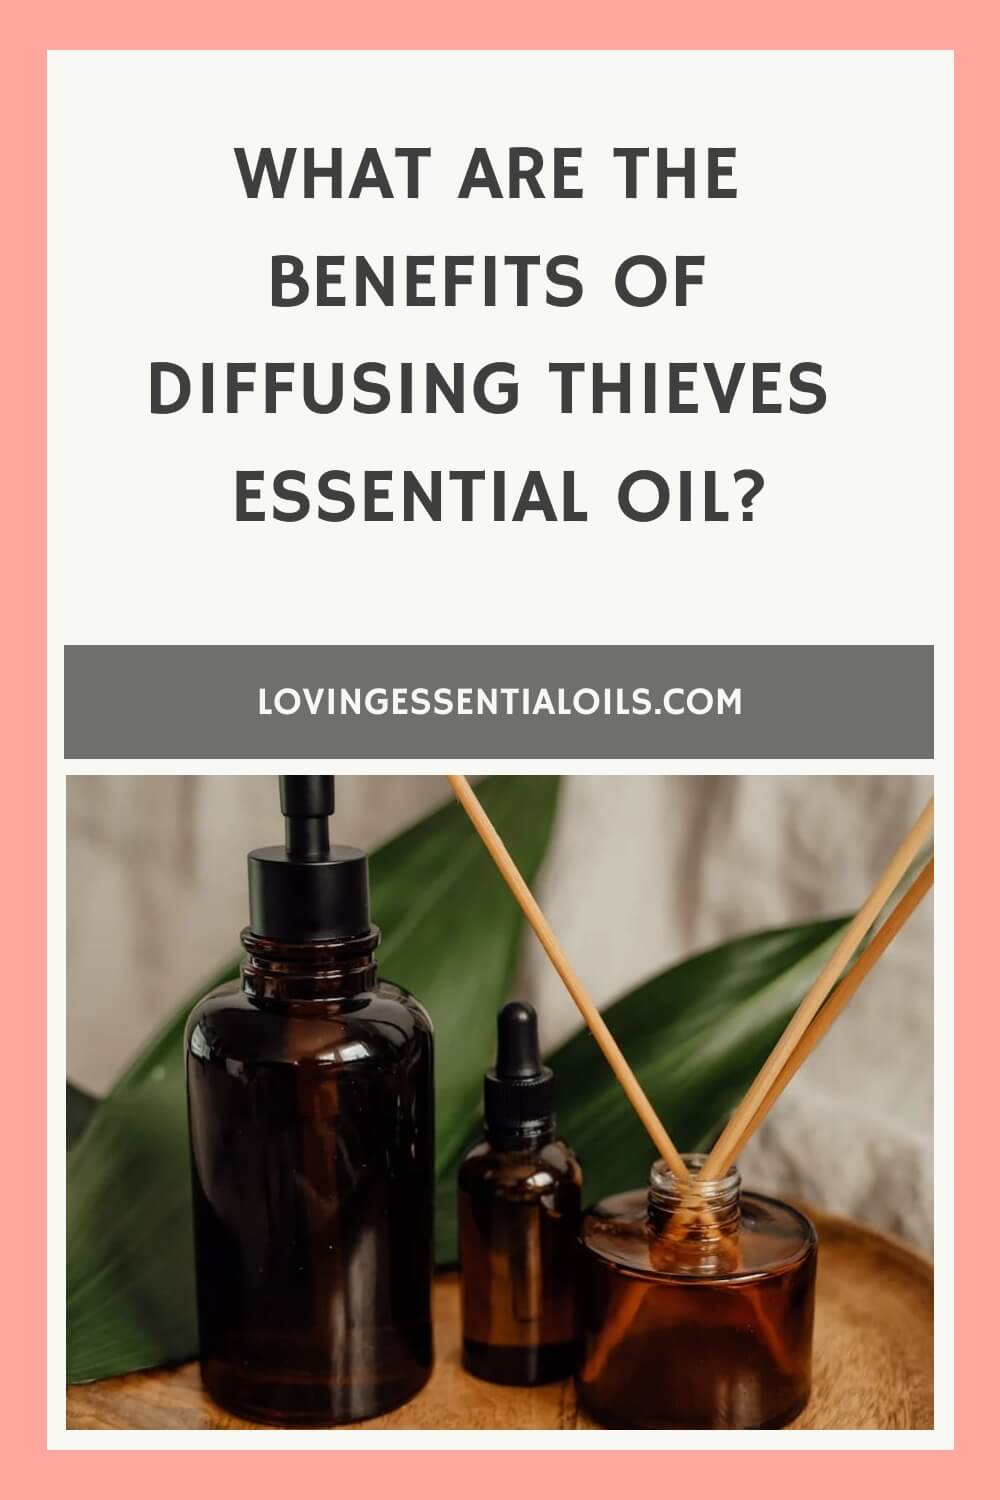 Benefits of Diffusing Thieves Essential Oil